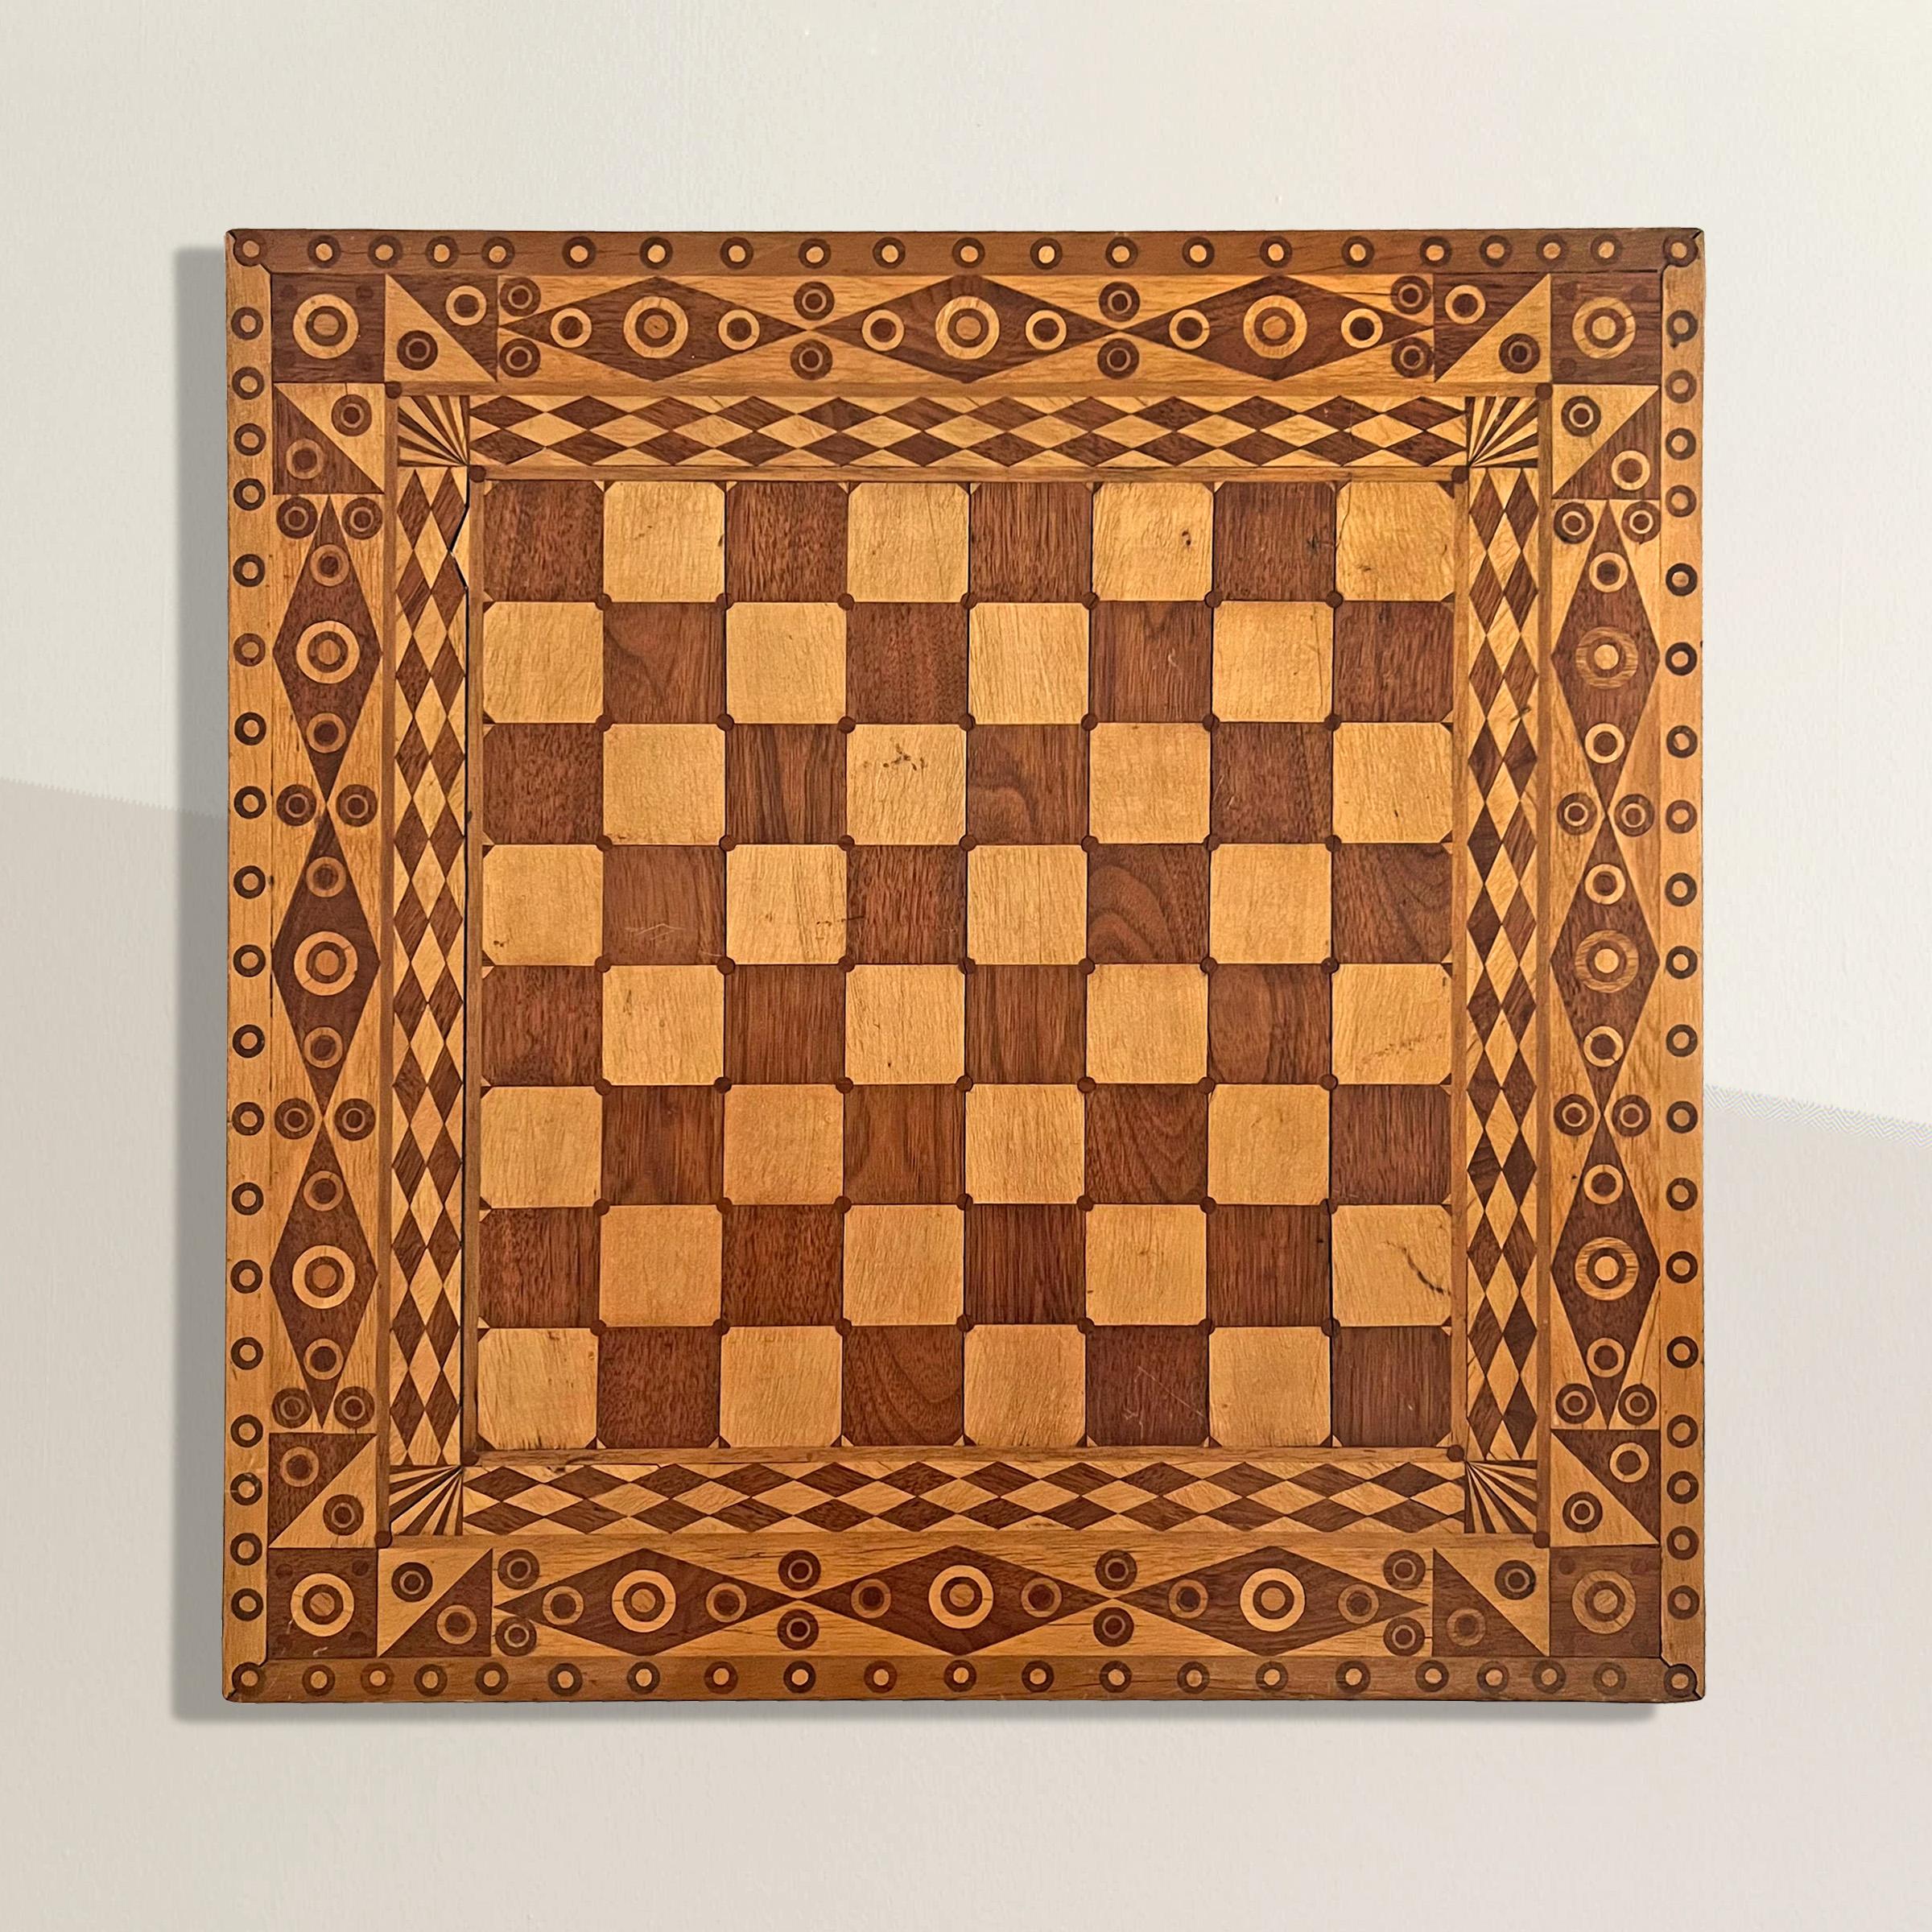 Prepare to be captivated by this extraordinary early 20th century American Folk Art game board, a true marvel of craftsmanship and creativity. Constructed meticulously from a staggering 1,226 geometric patterned inlaid oak and maple wood pieces,